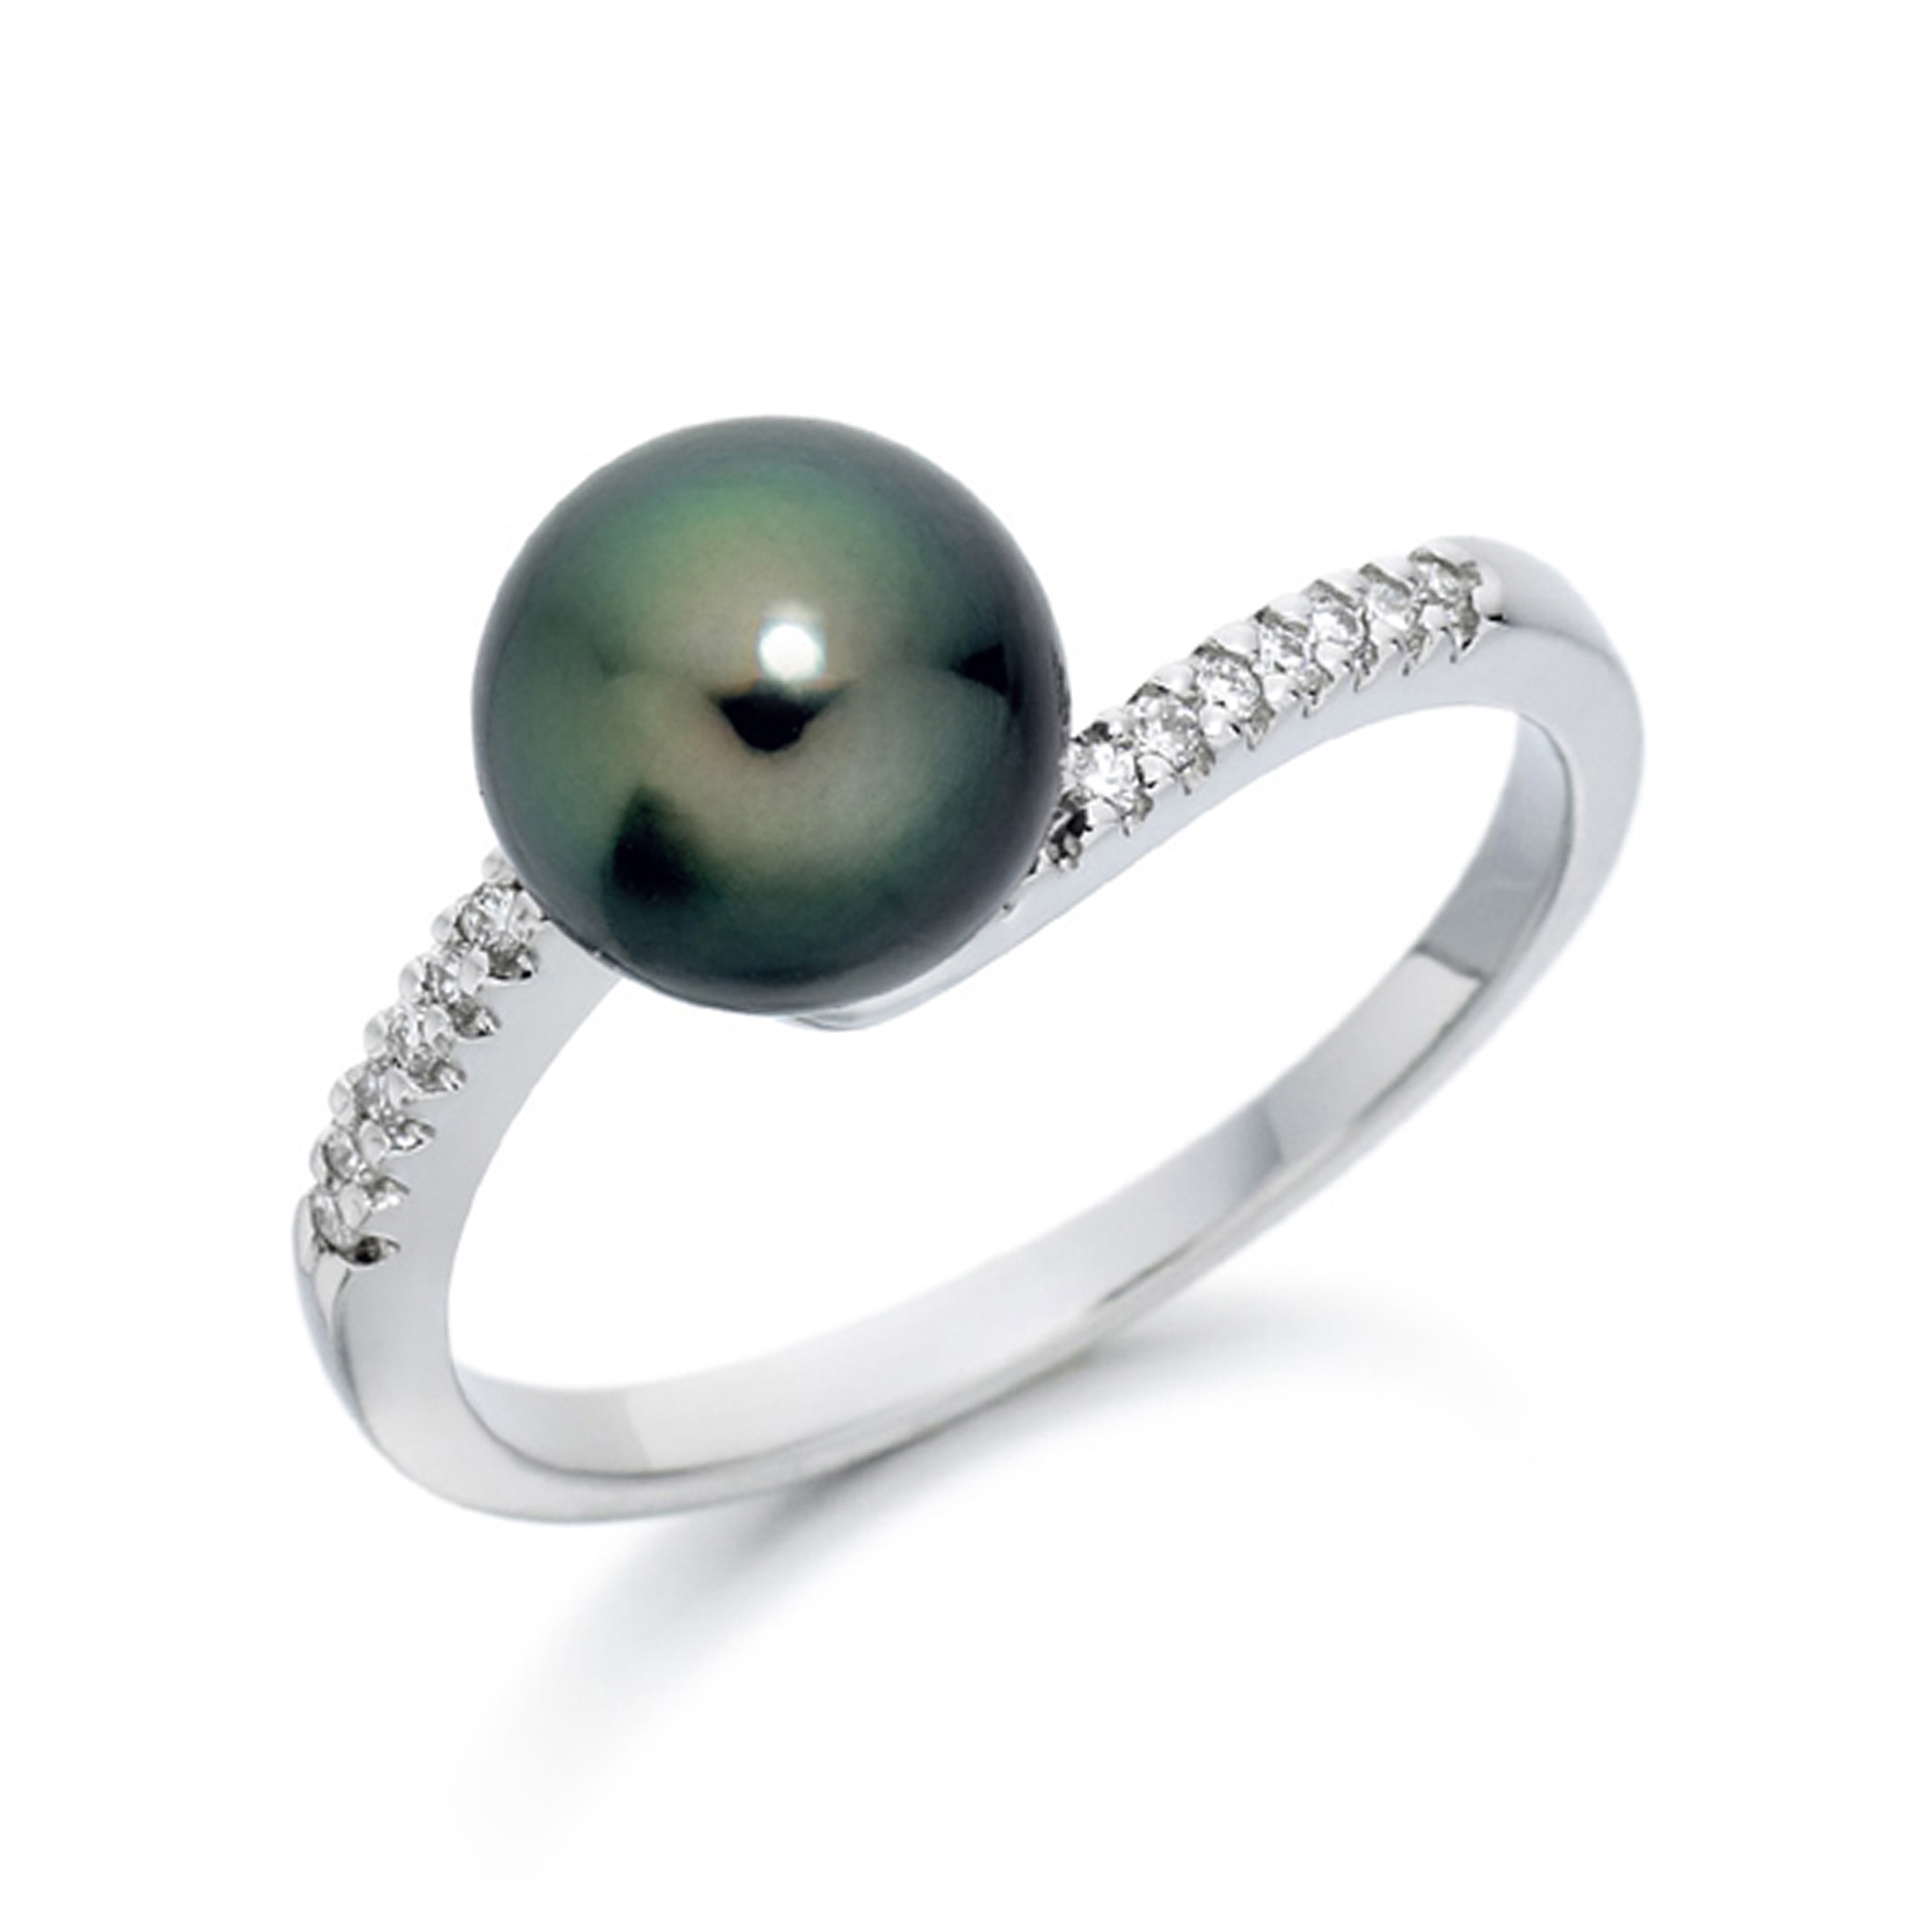 7mm Round Black Pearl Stones On Shoulder Diamond And Pearl Engagement Ring